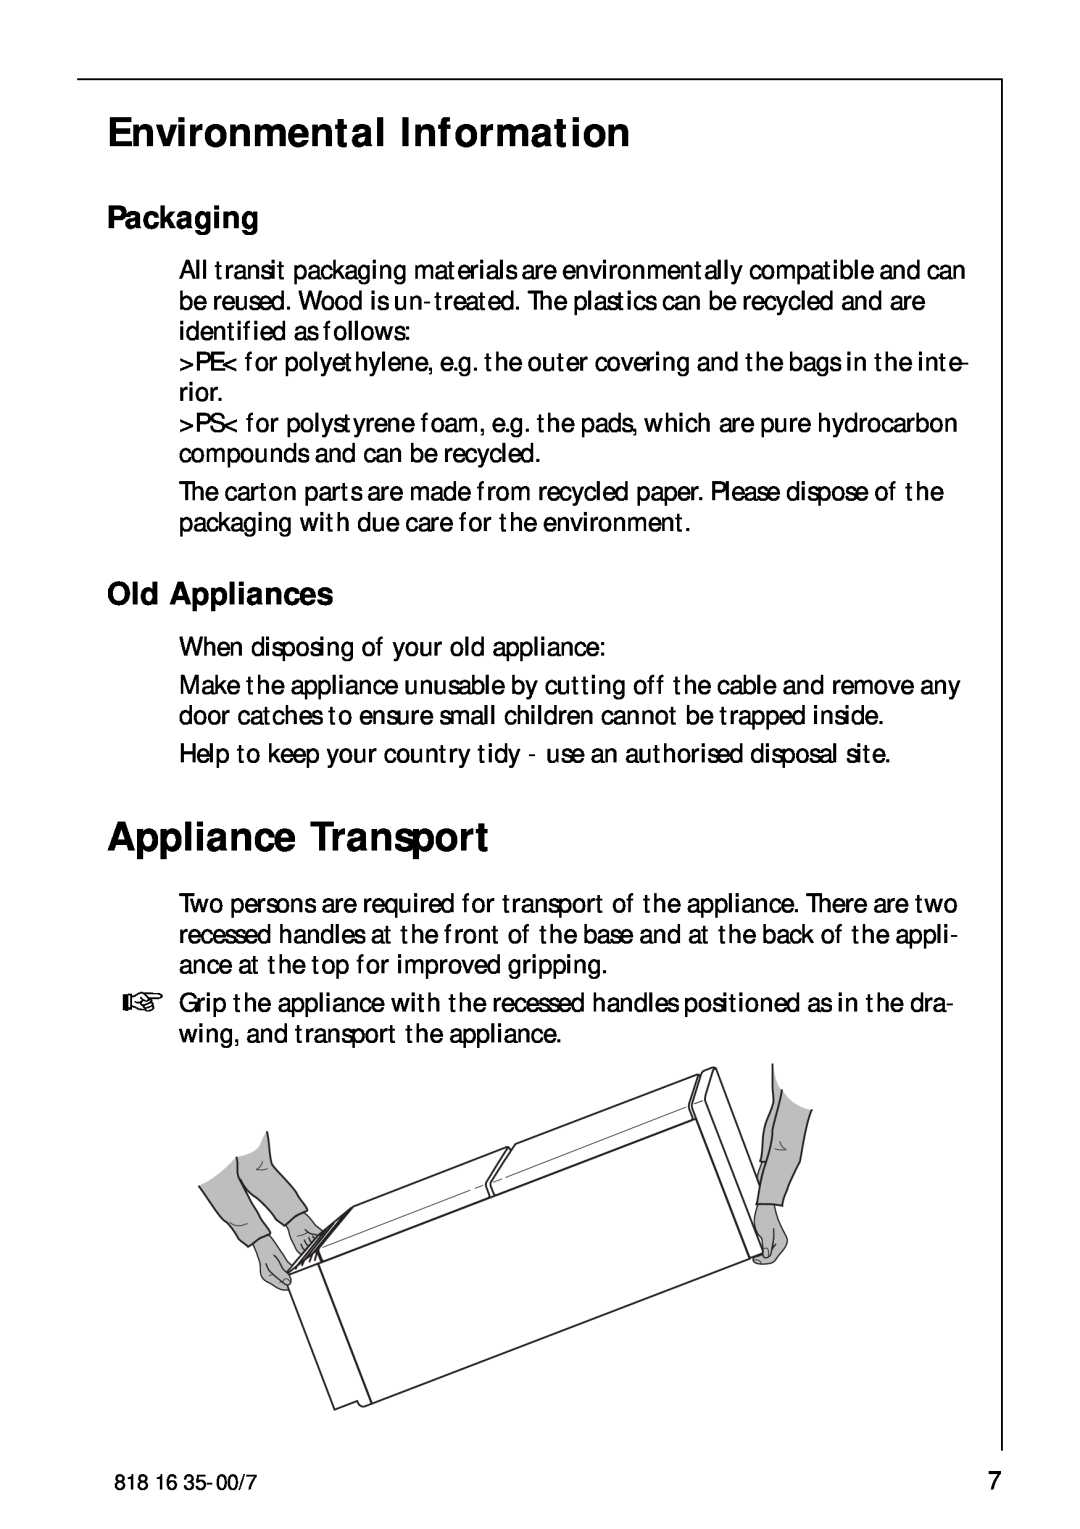 Electrolux KO_SANTO 4085 operating instructions Environmental Information, Appliance Transport, Packaging, Old Appliances 